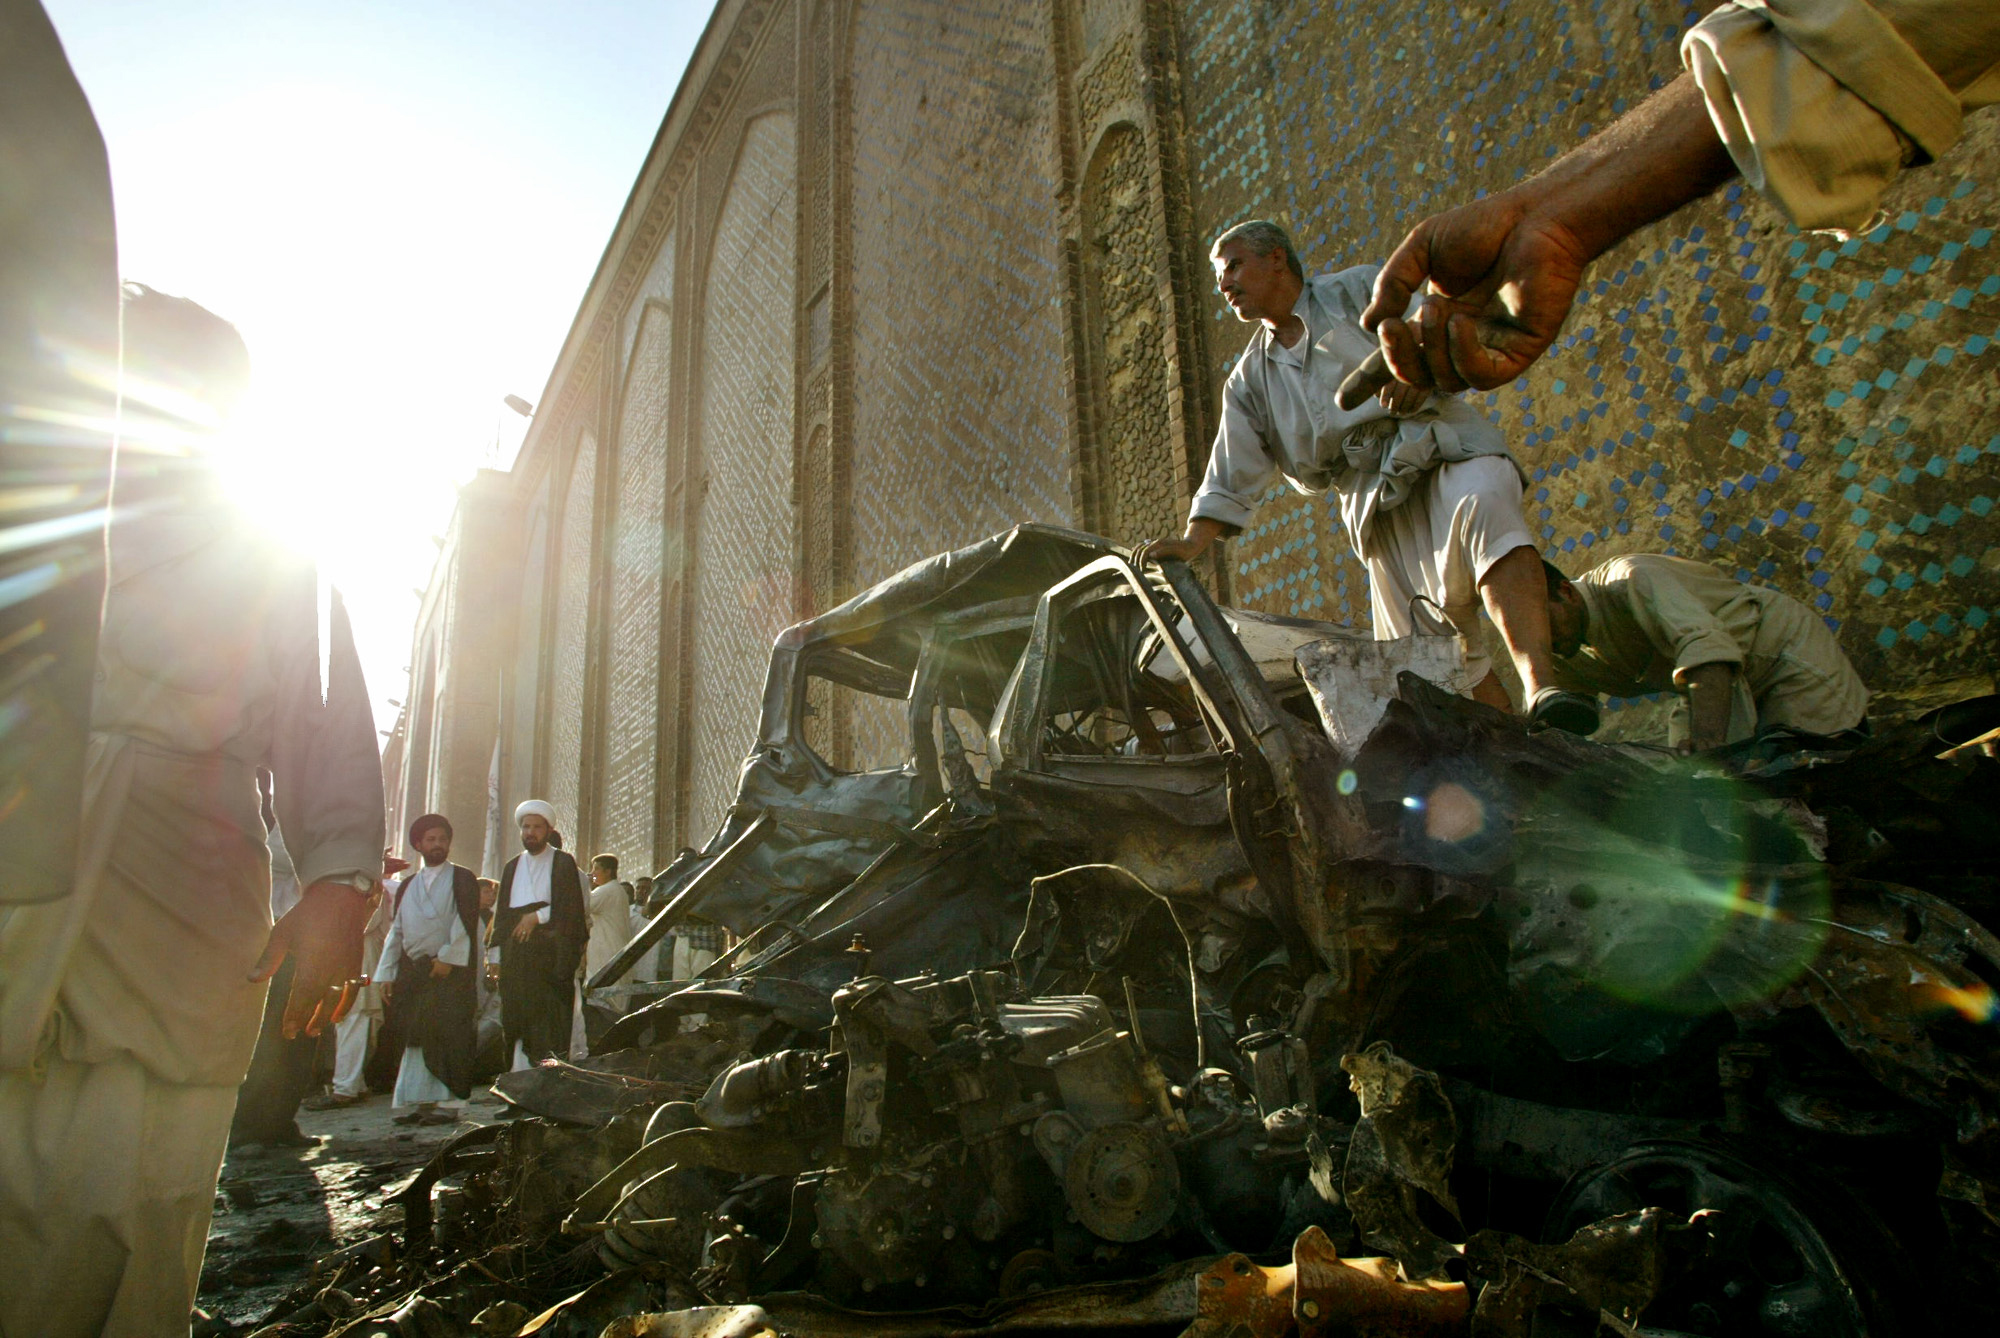 Iraqis dig through the rubble left after a car bomb exploded next to the Imam Ali shrine in Najaf, Iraq killing at least 75 and wounding 140 others, Aug. 29, 2003.